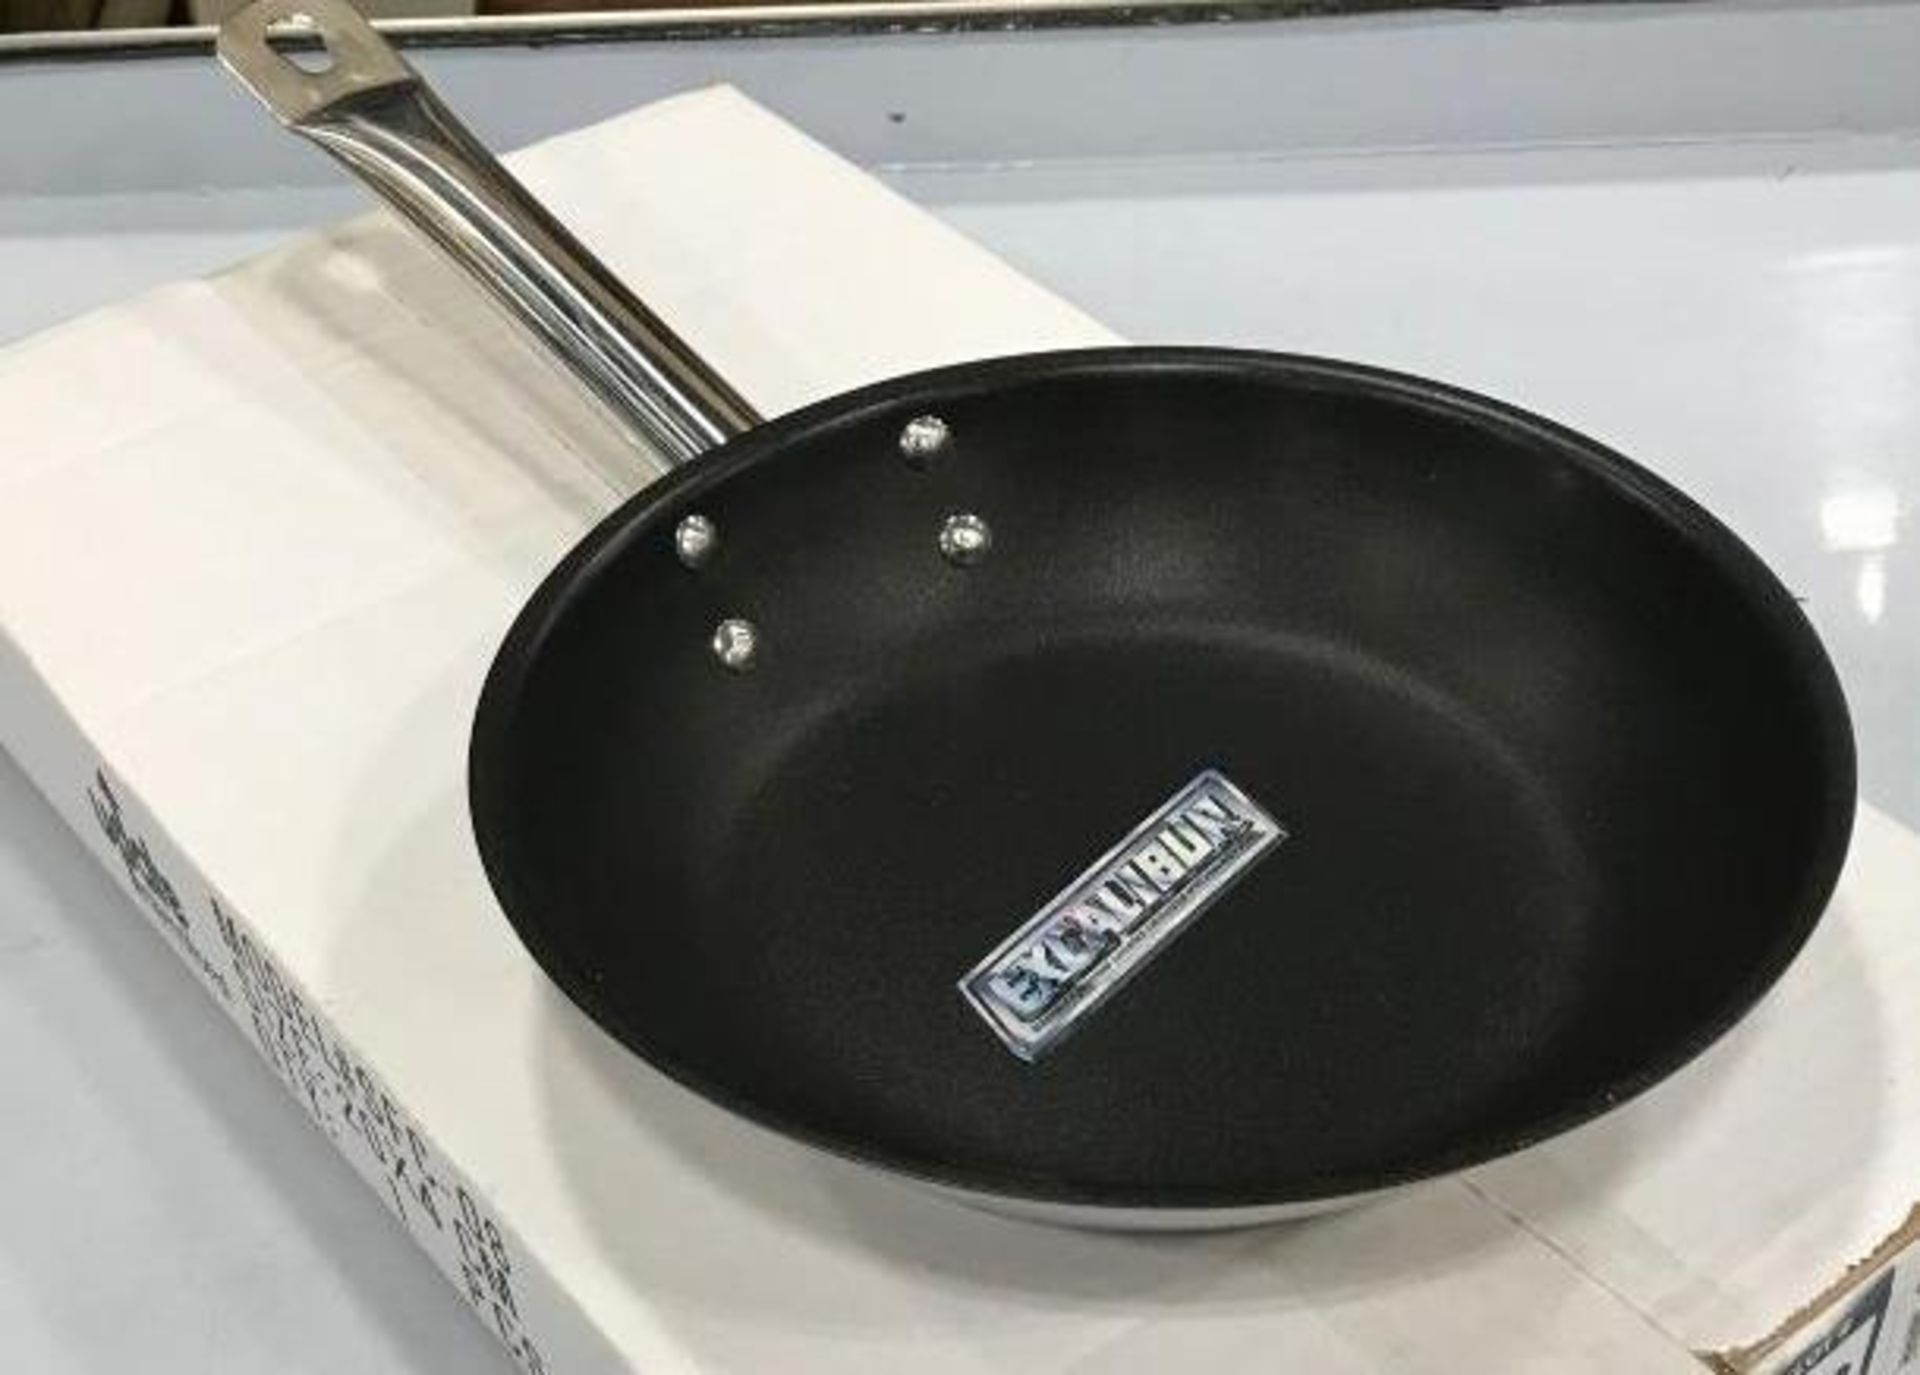 8" STAINLESS STEEL INDUCTION FRYING PAN W/ EXCALIBUR NON-STICK COATING - UPDATE SFC-08 - NEW - Image 2 of 4